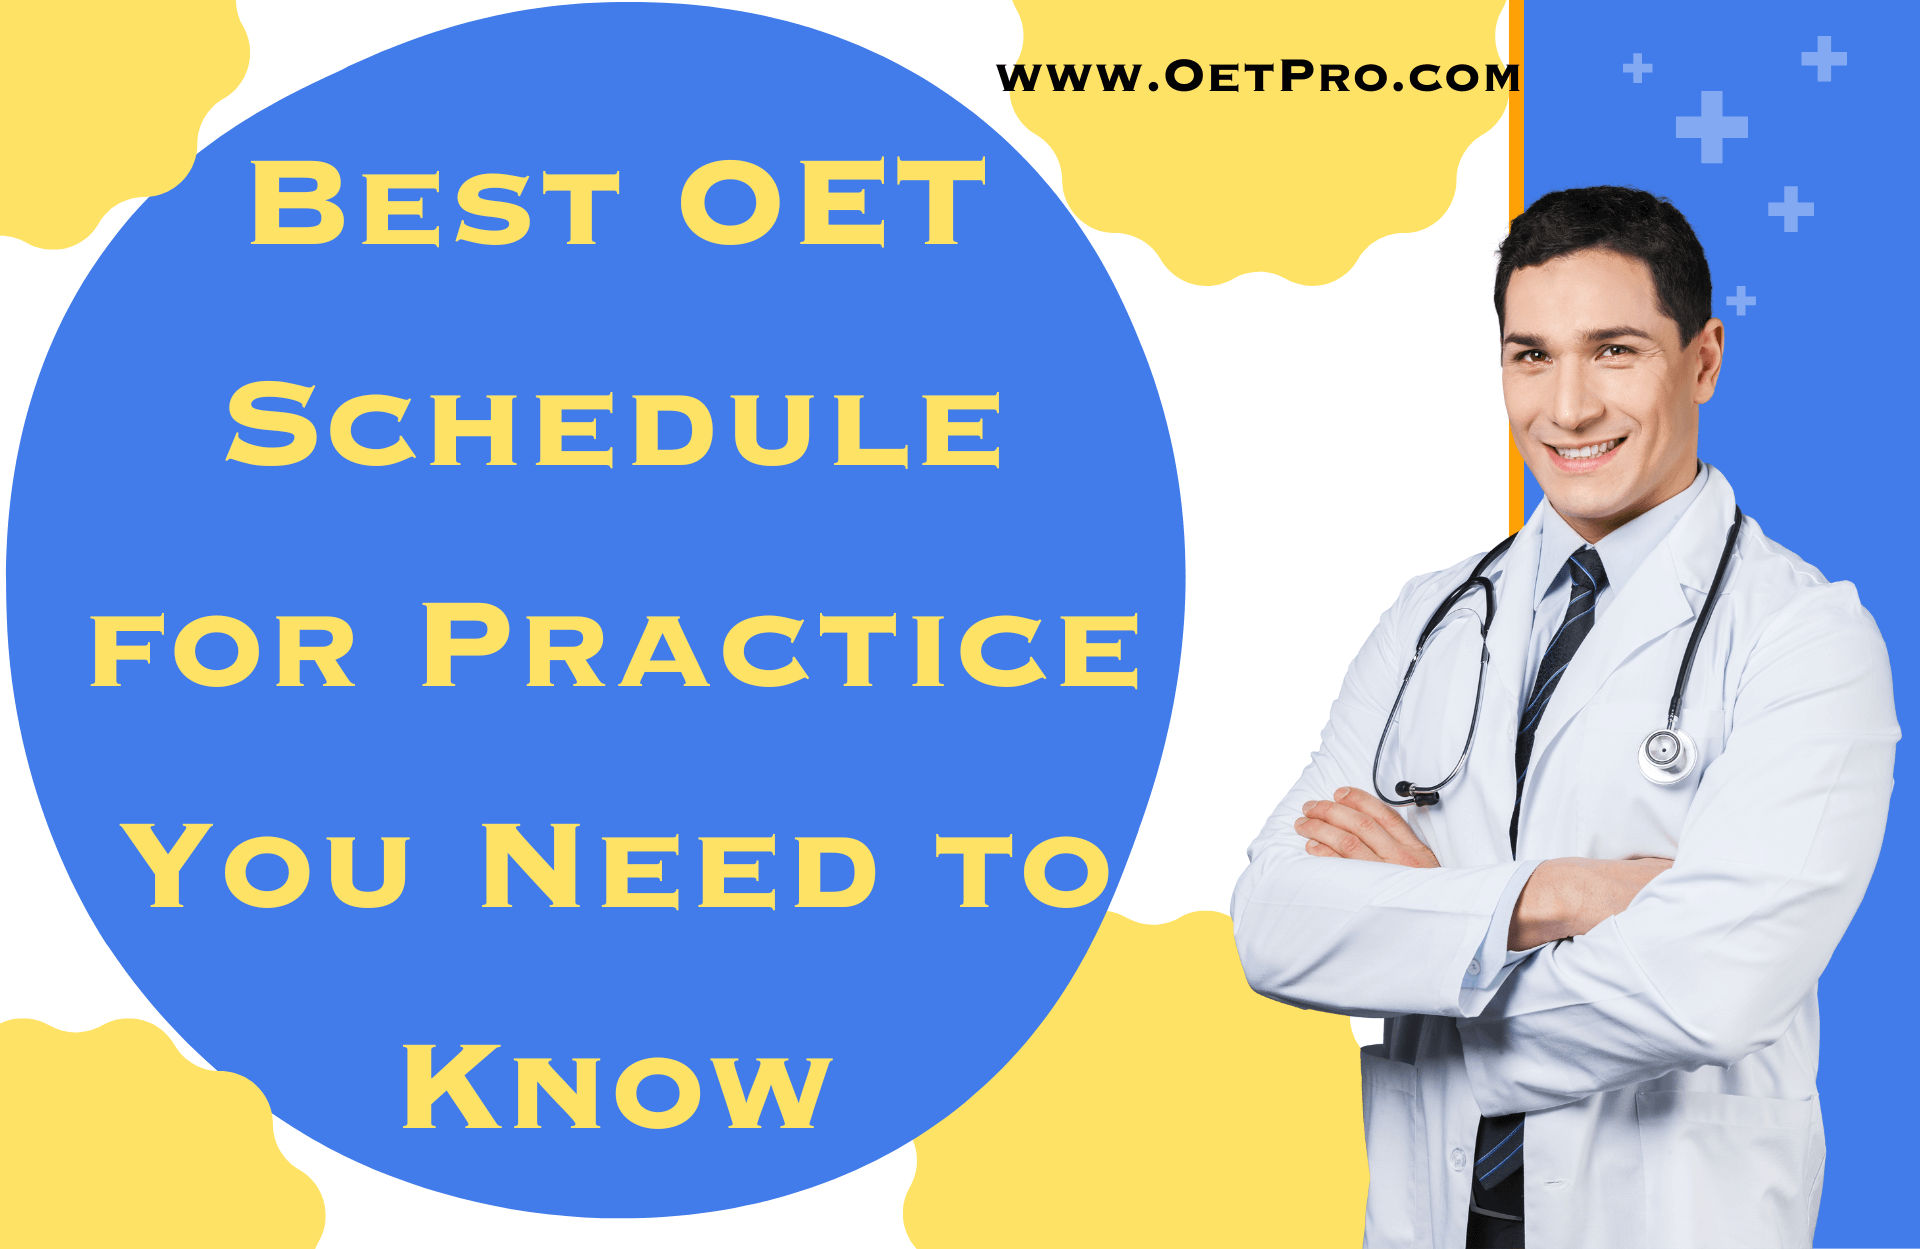 Best OET Schedule for Practice You Need to Know